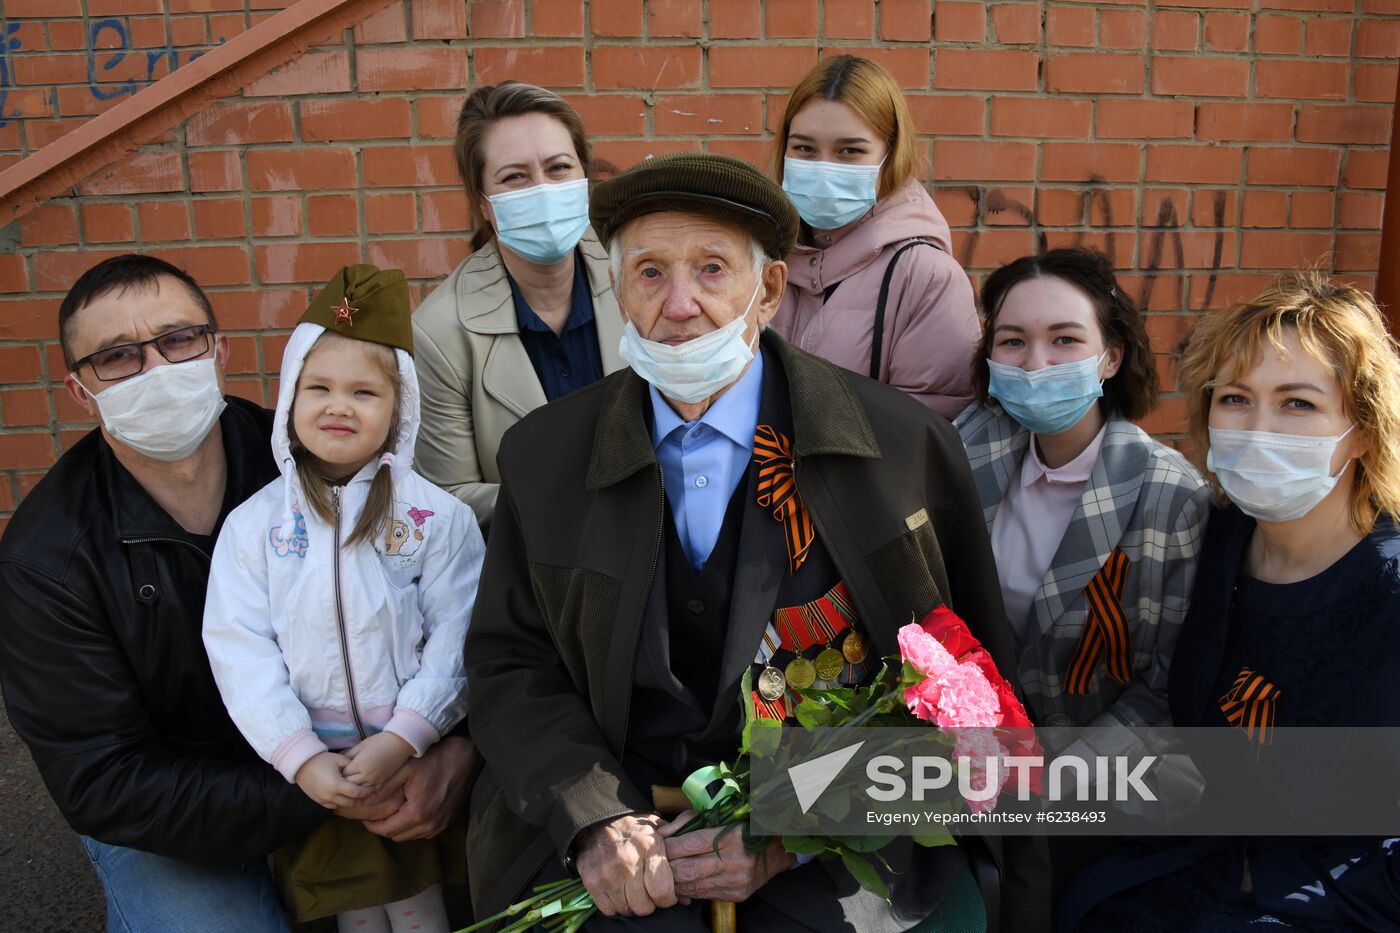 WWII veterans greeted on Victory Day